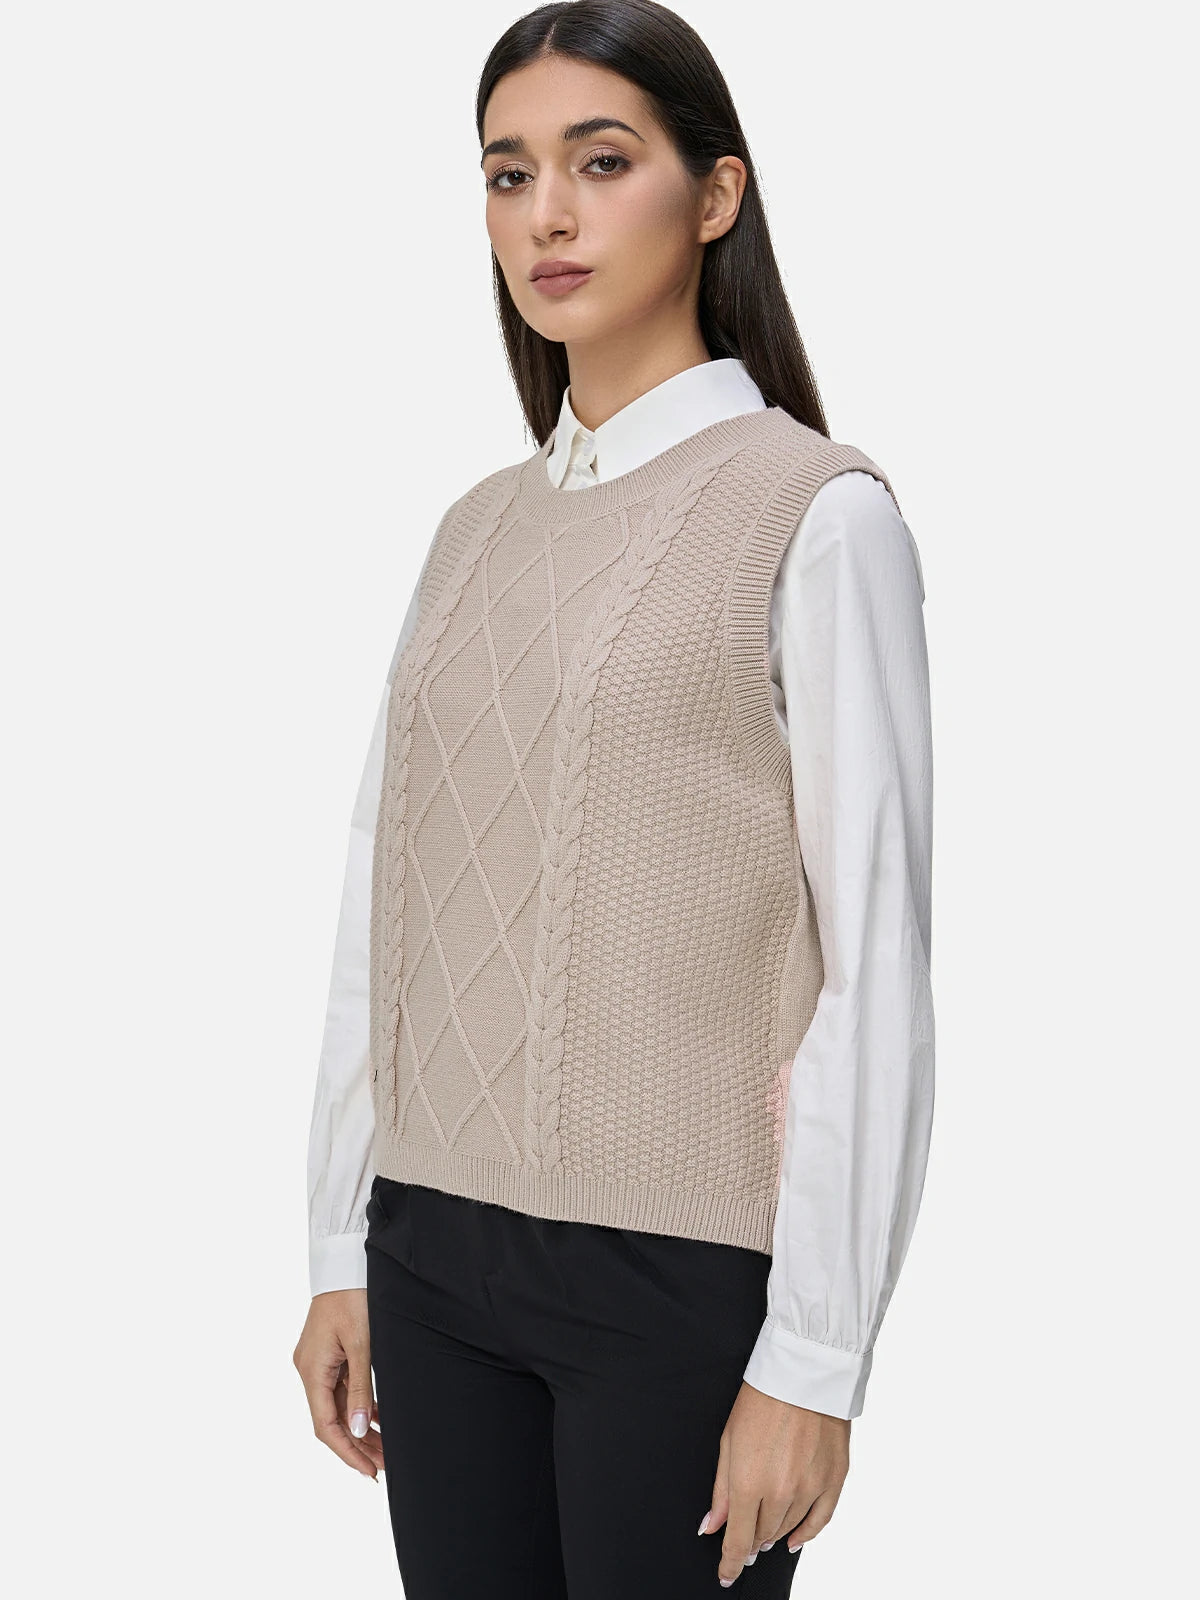 Round-Neck Sweater Vest for a Flattering Silhouette